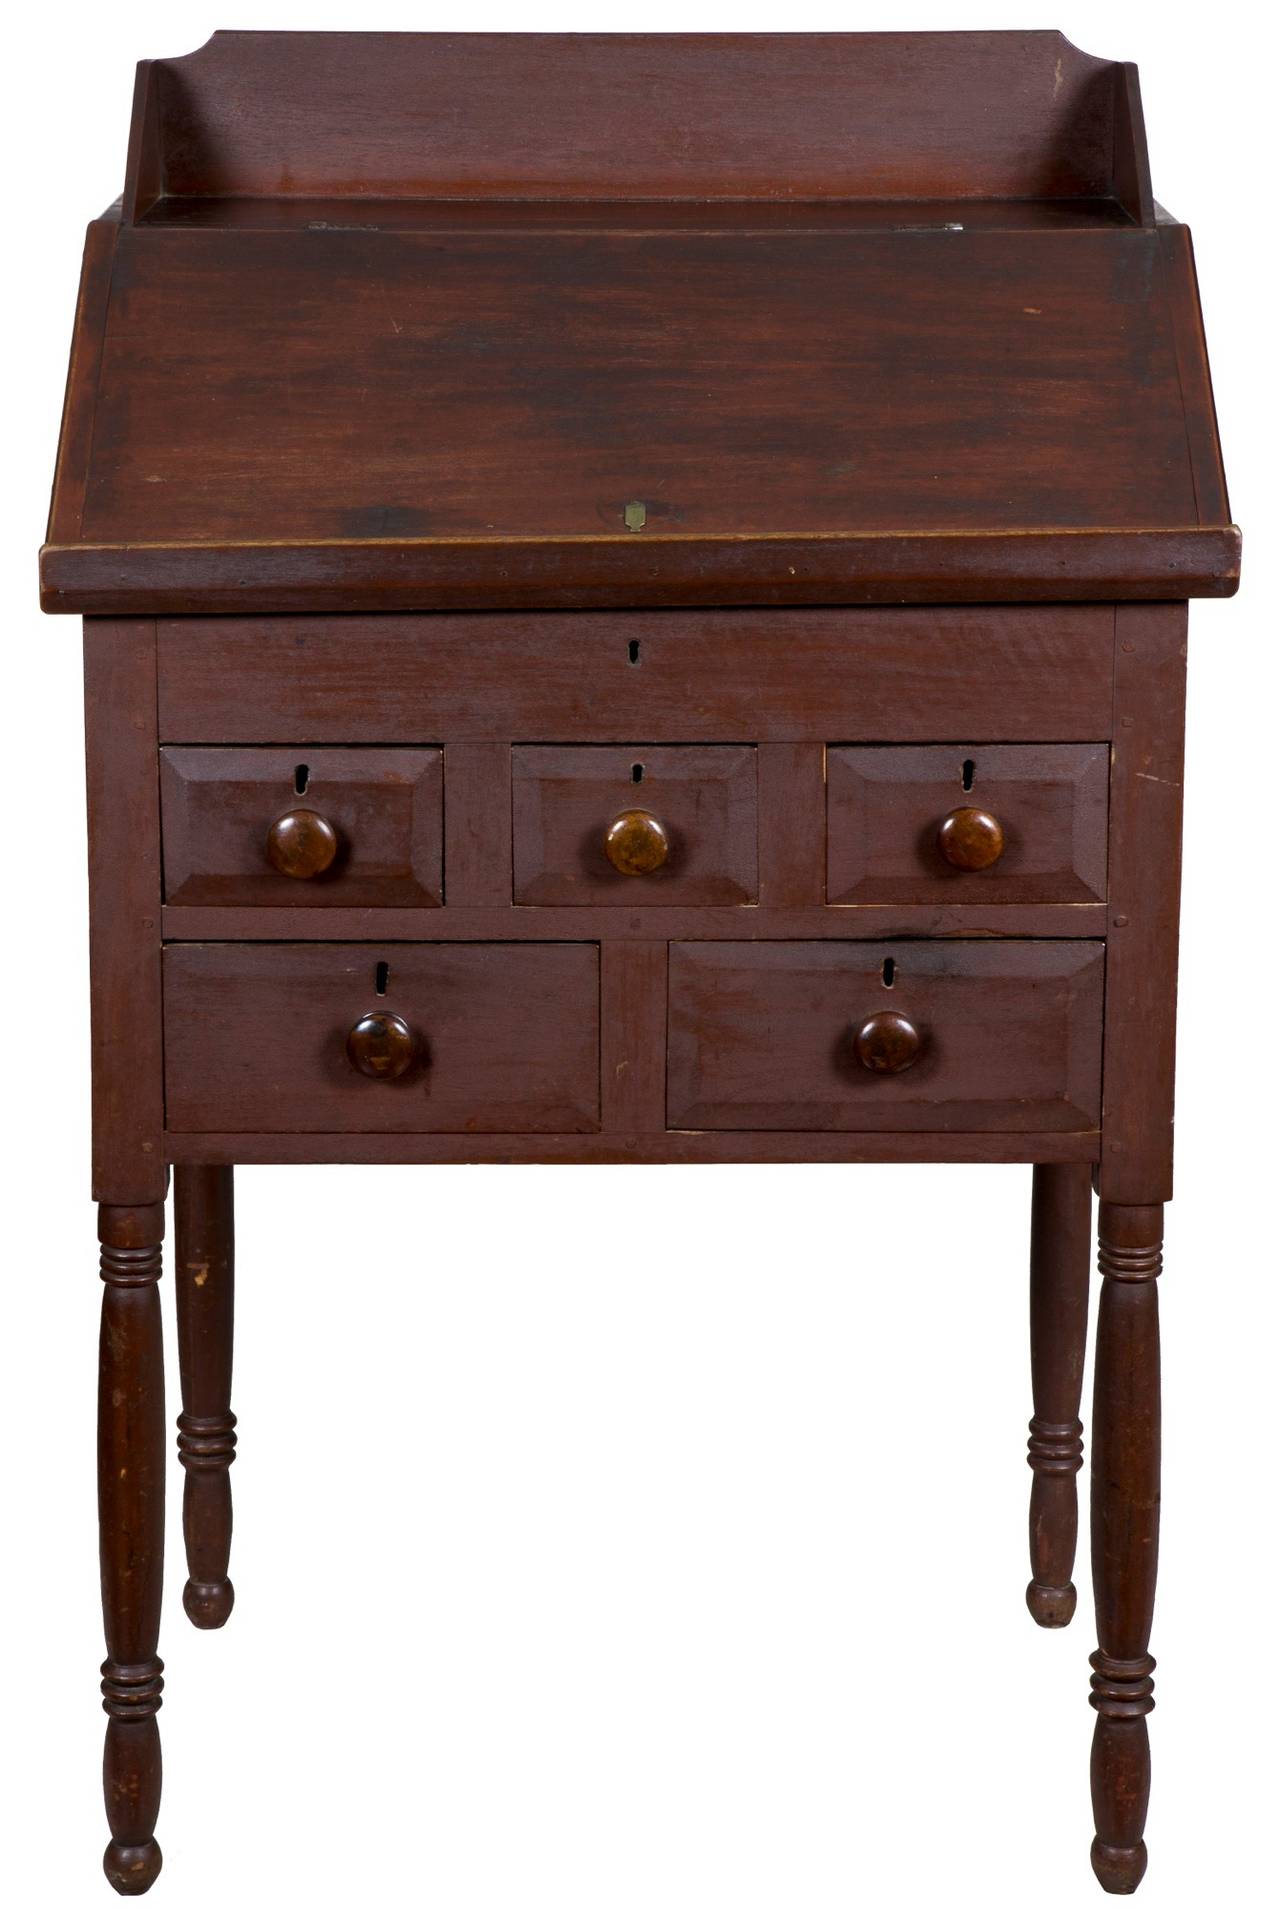 American Red Painted Walnut Slant Lid Standing Desk, Probably Pennsylvania, circa 1840 For Sale